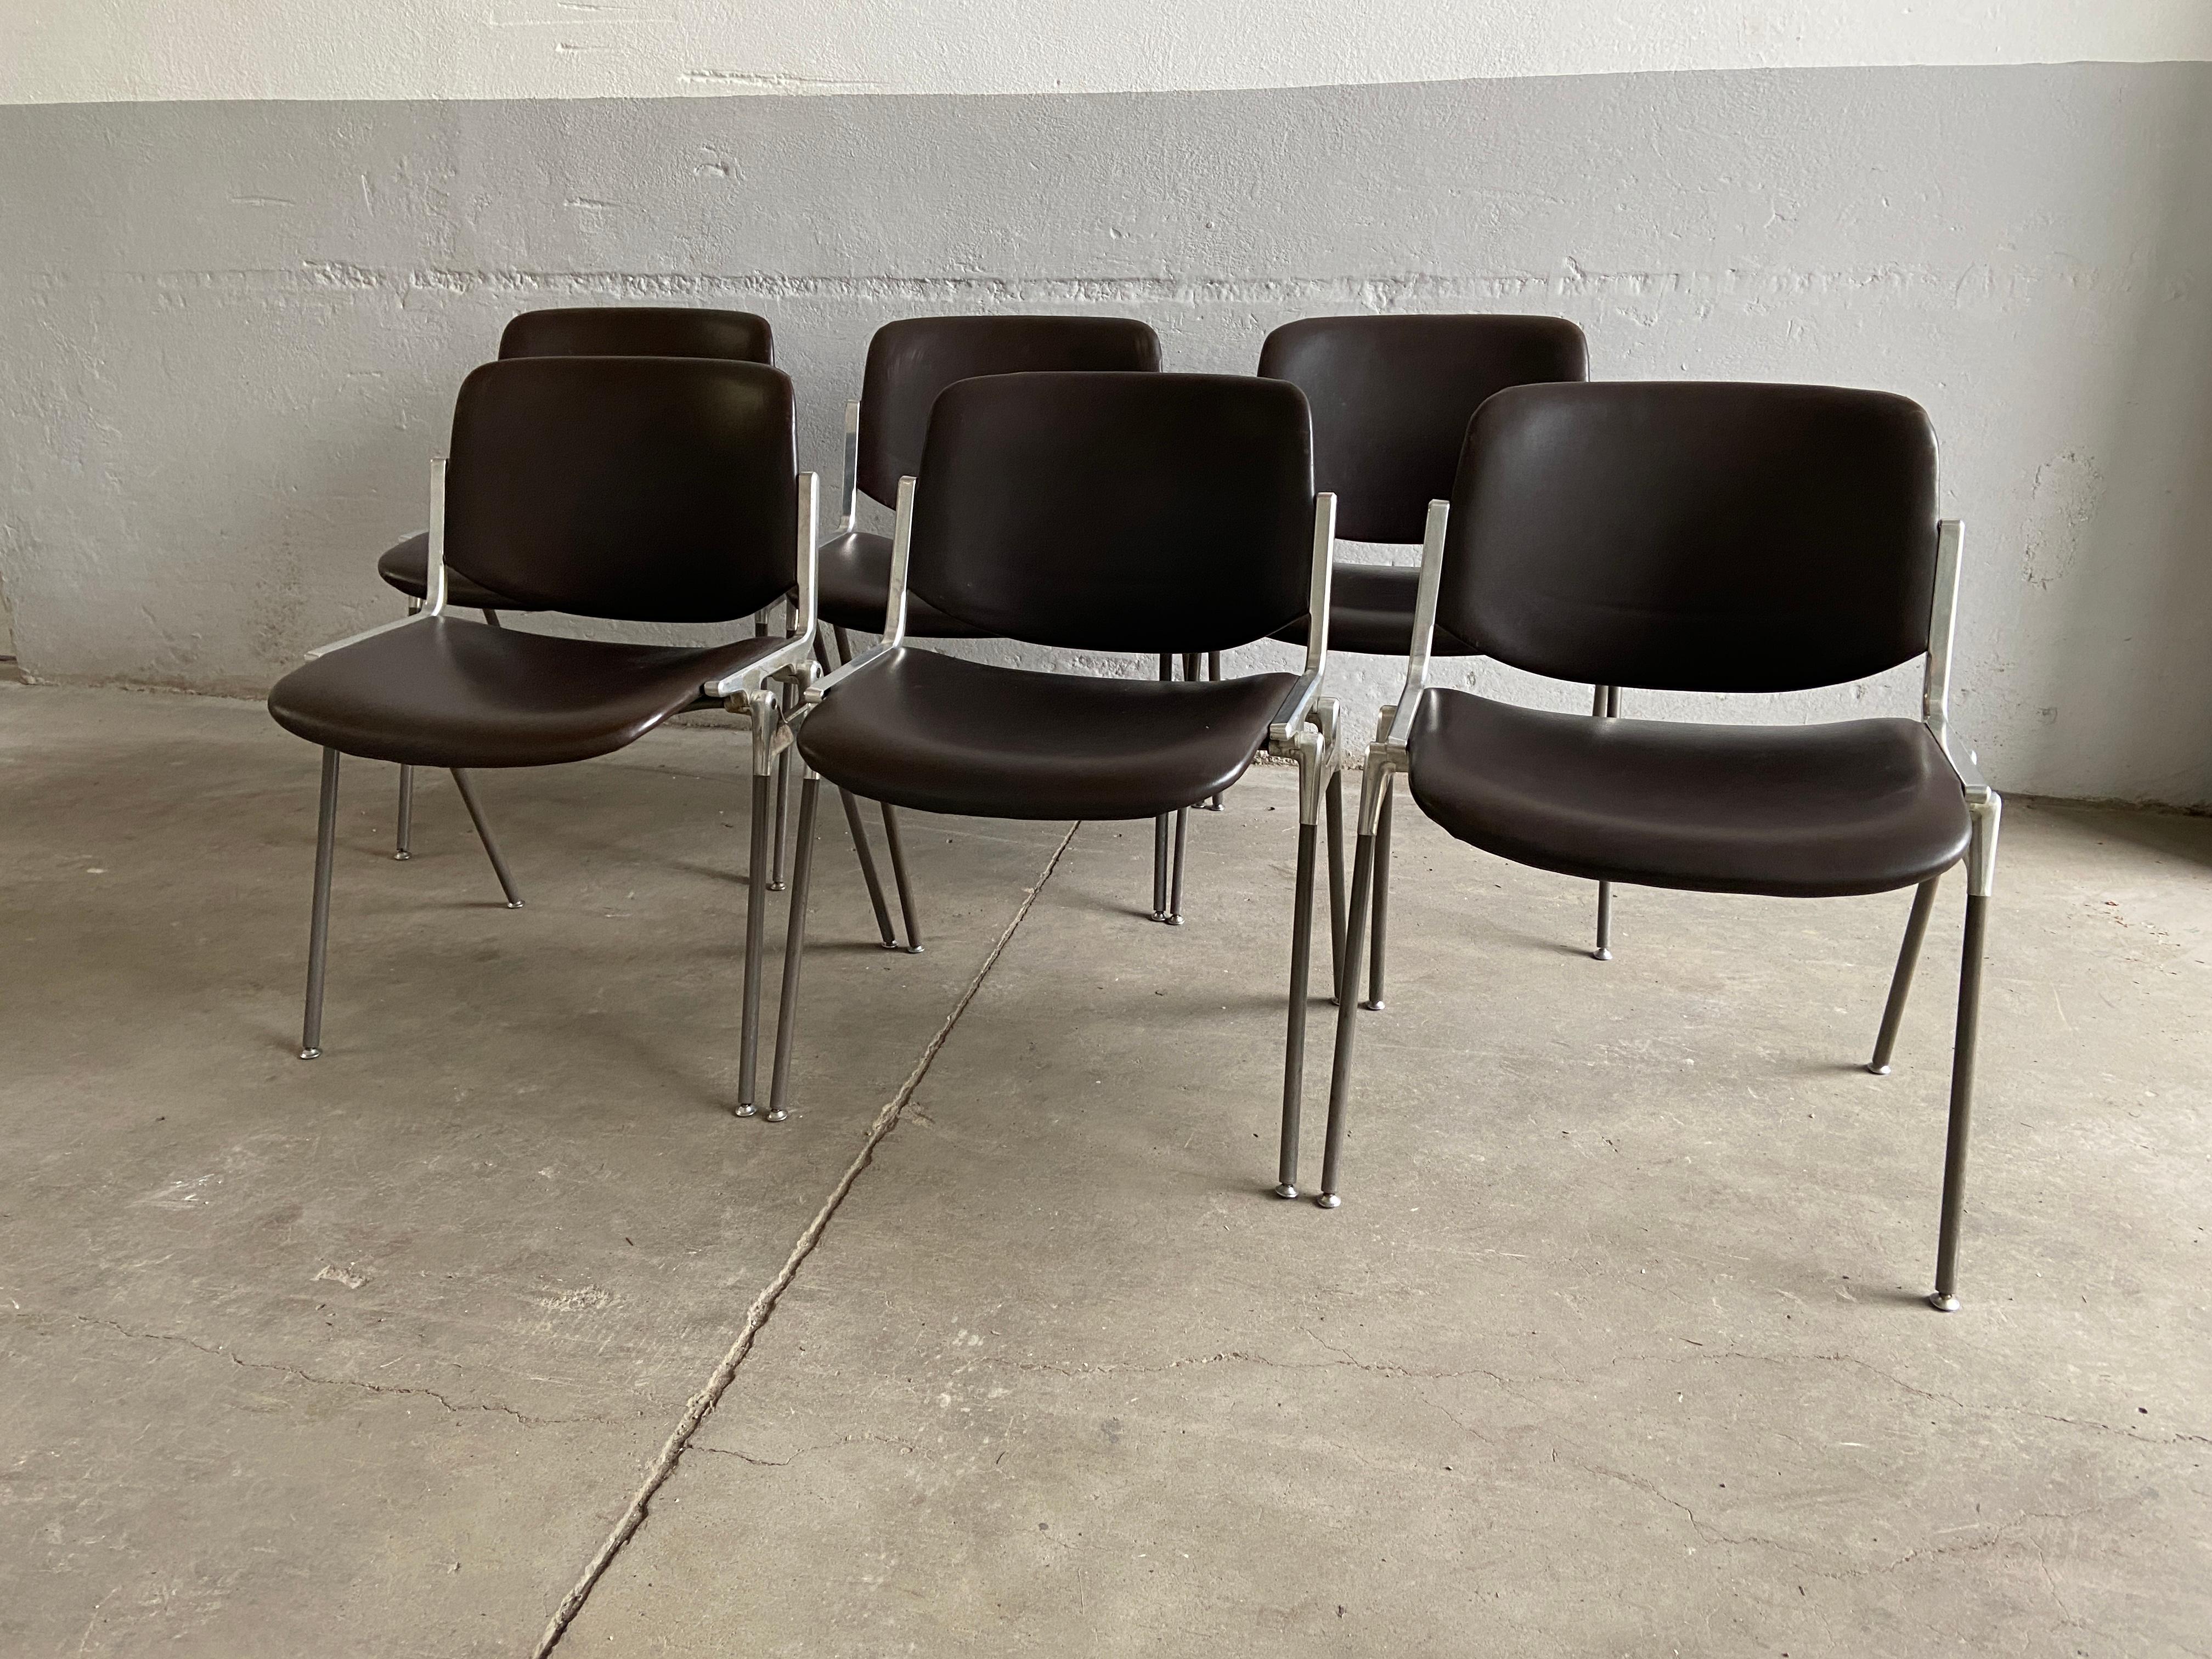 Mid-20th Century Mid-Century Modern Italian Set of 6 Stackable Chairs by G. Piretti for Castelli